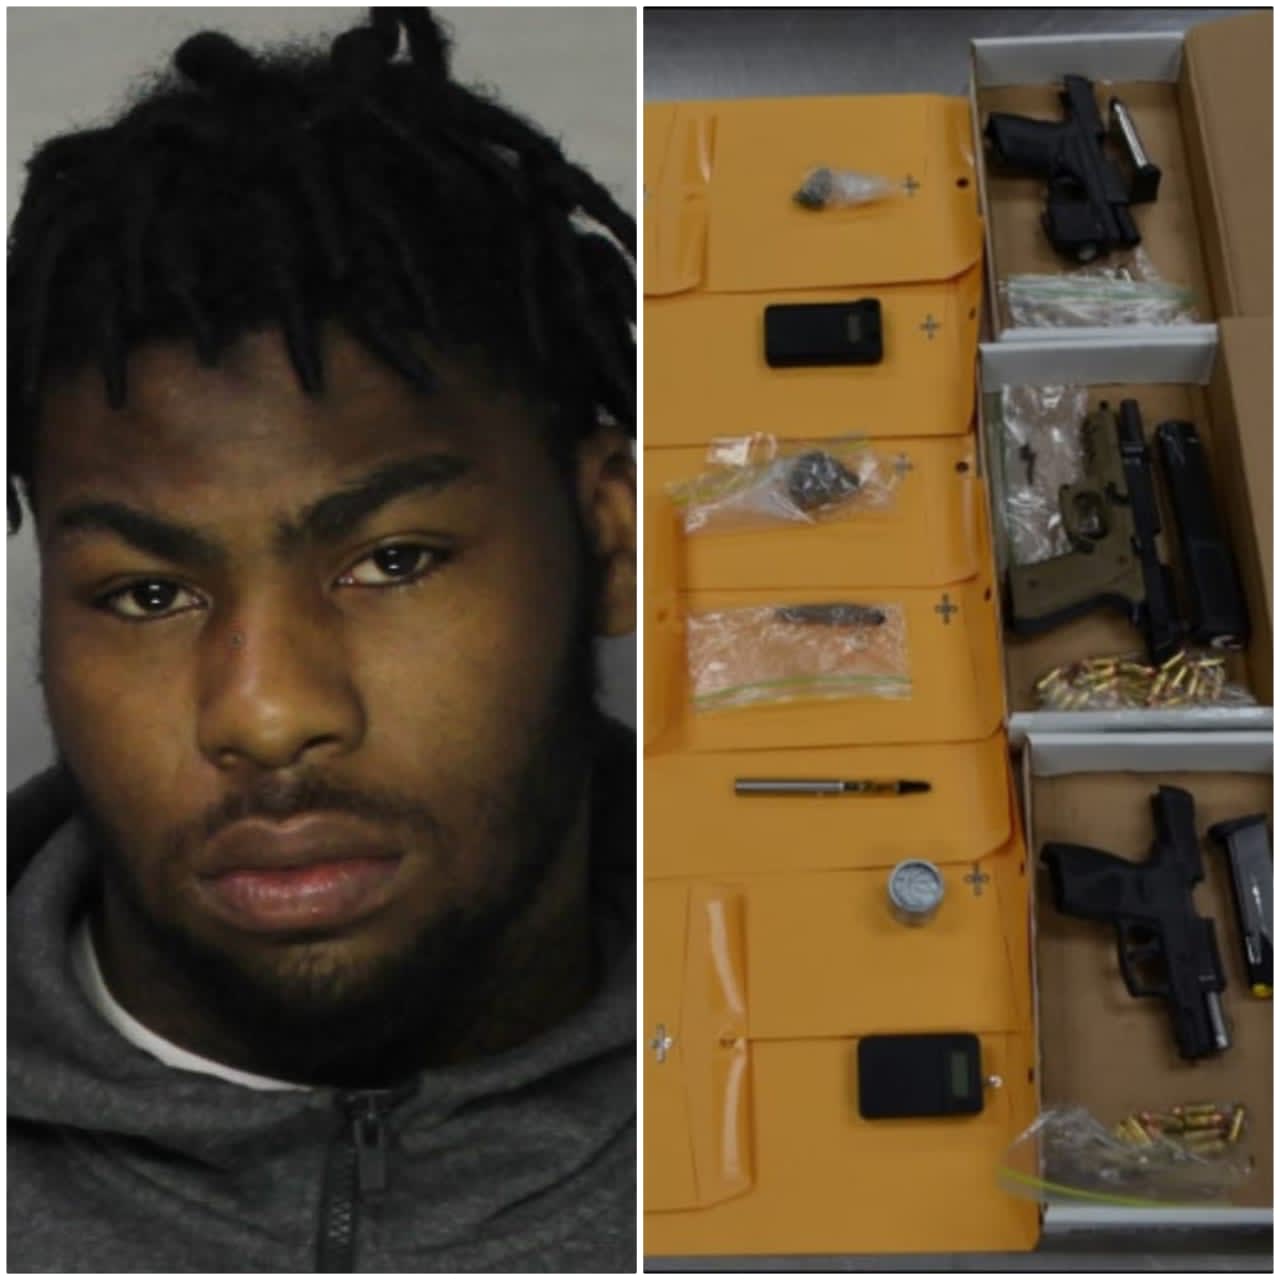 Jayden Markees Selvey; items seized by police April 6.